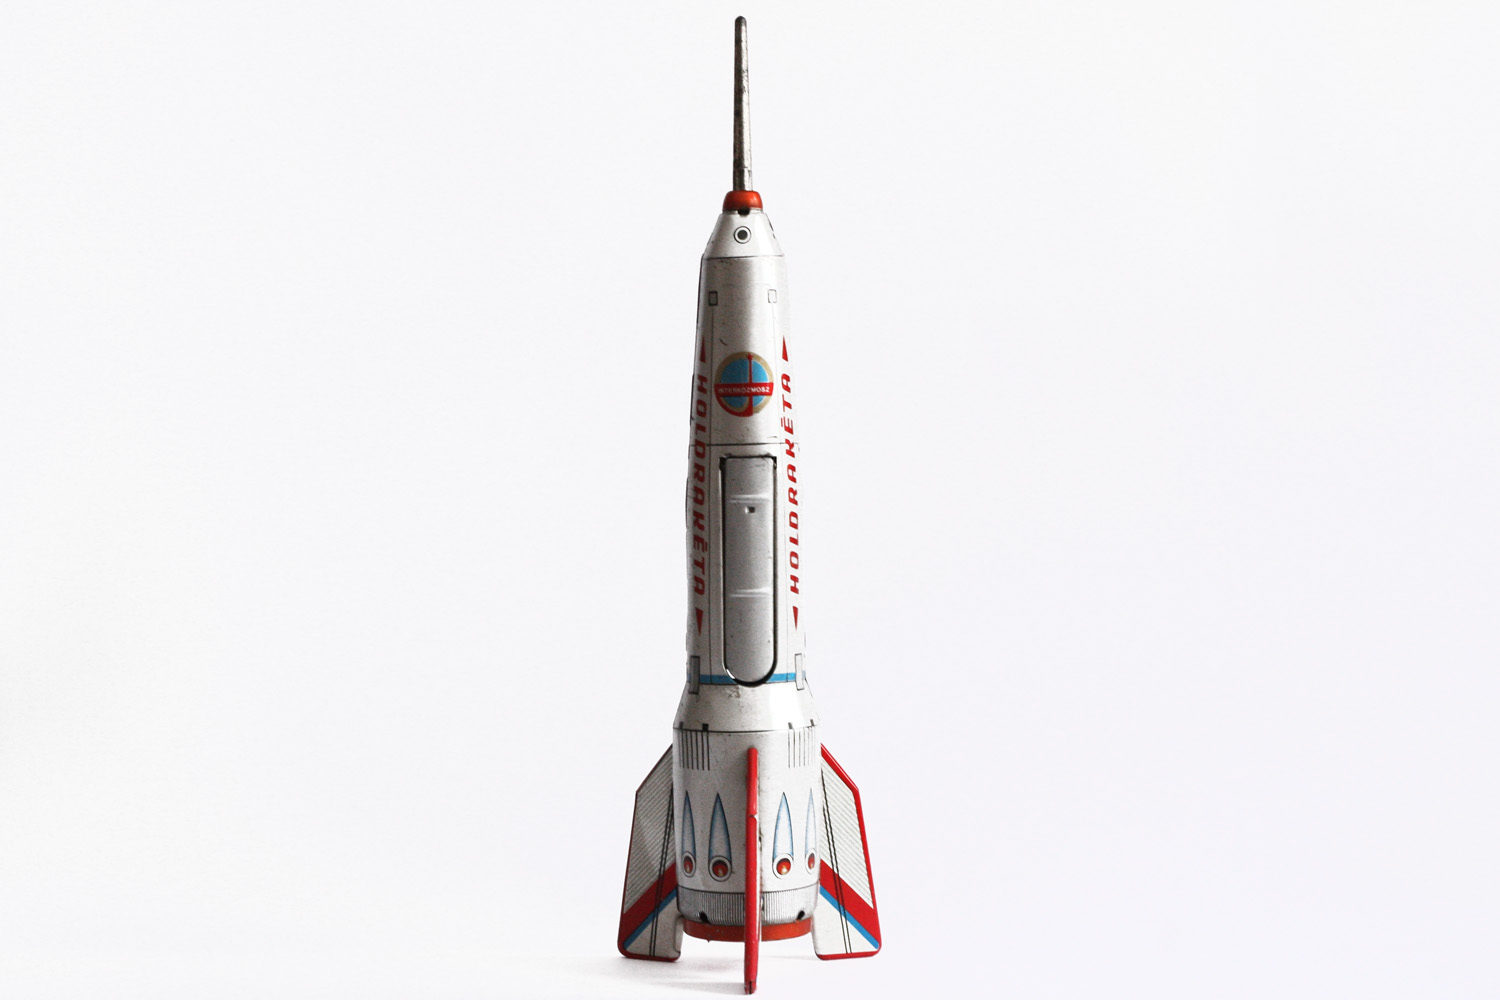 17 Cosmic Toys From The Age Of The Space Race